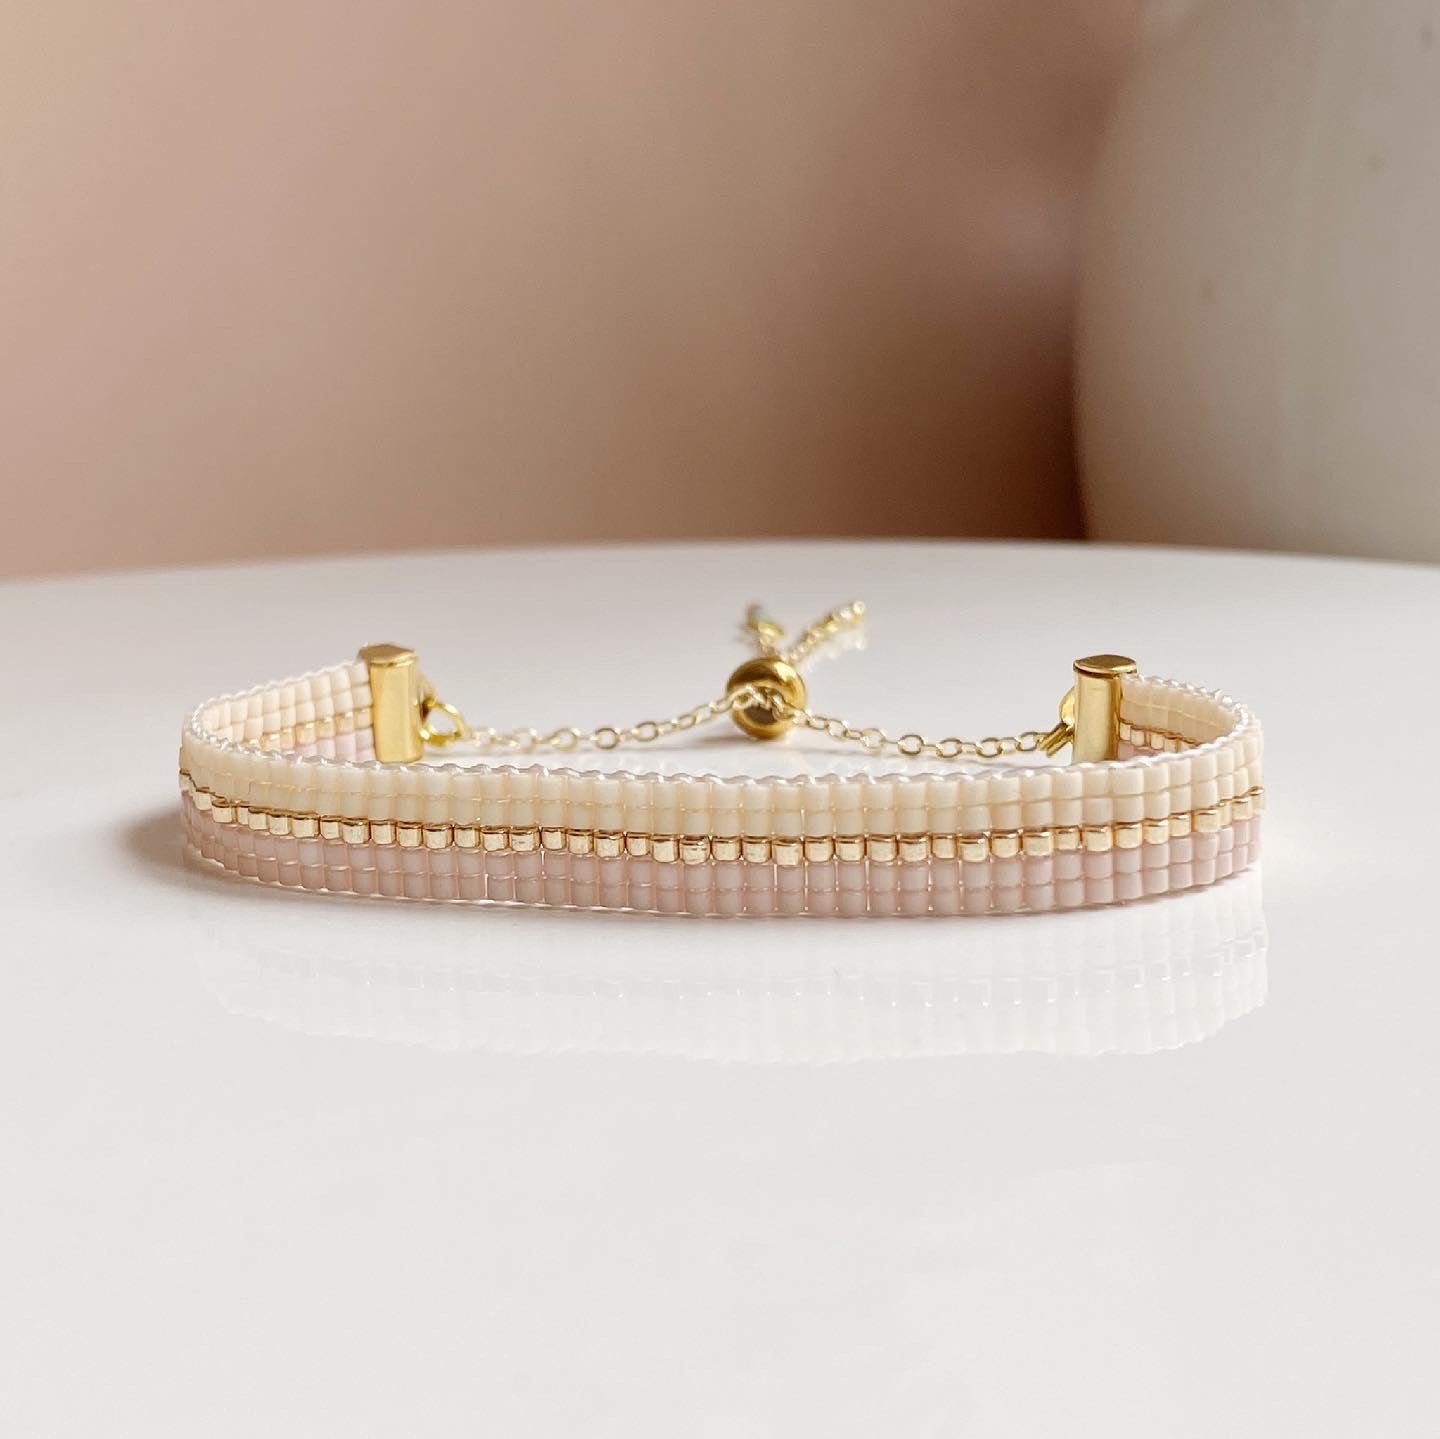 Pink and cream equator bead bracelet - available in both gold and silver options